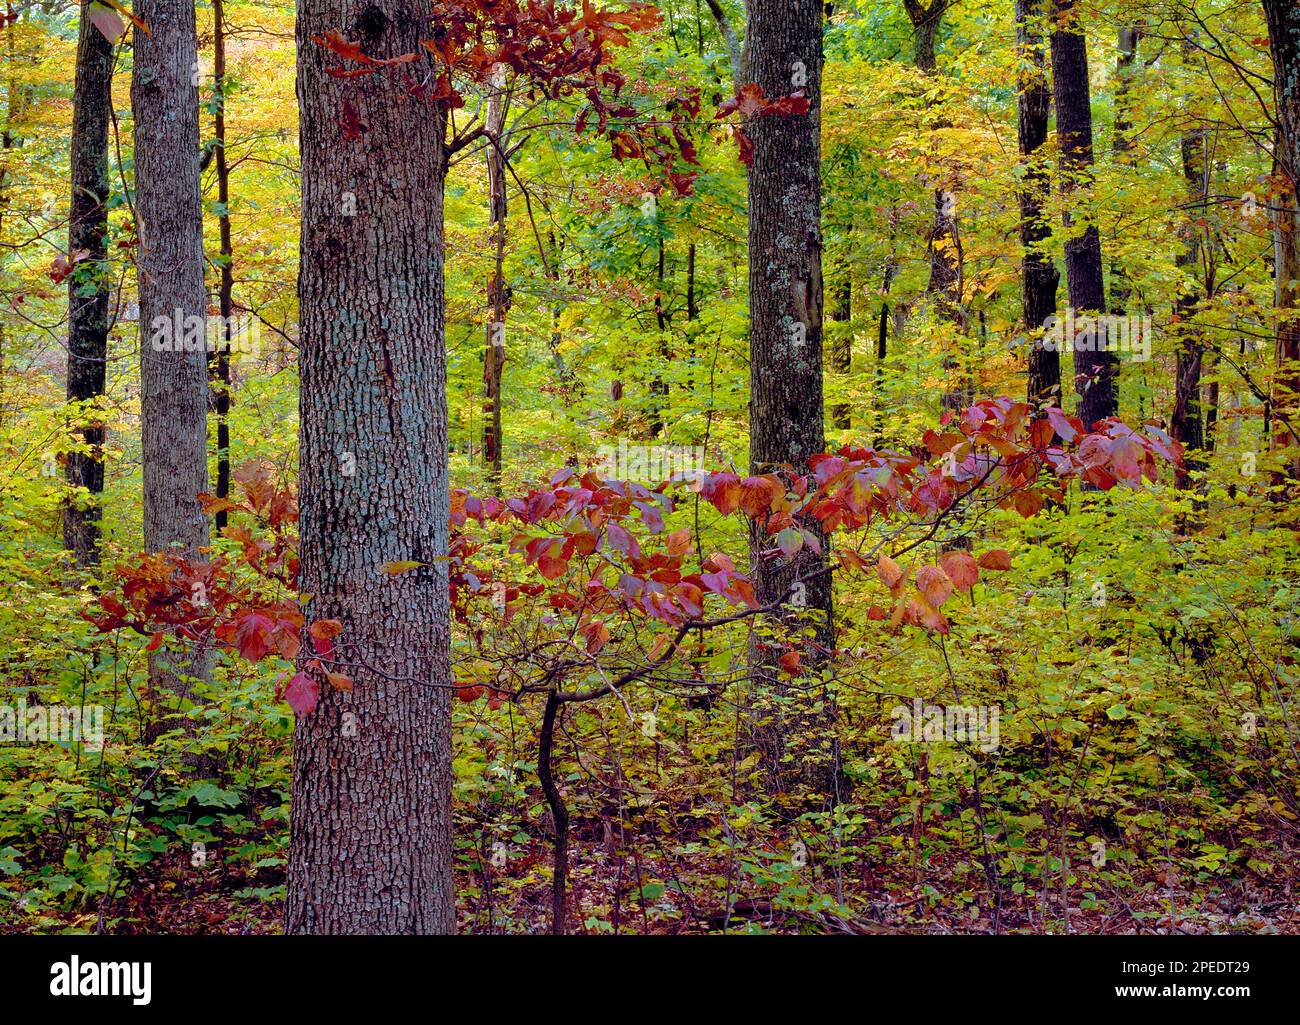 An autumn forest at Cowens Gap State Park in Fulton County, Pennsylvania Stock Photo